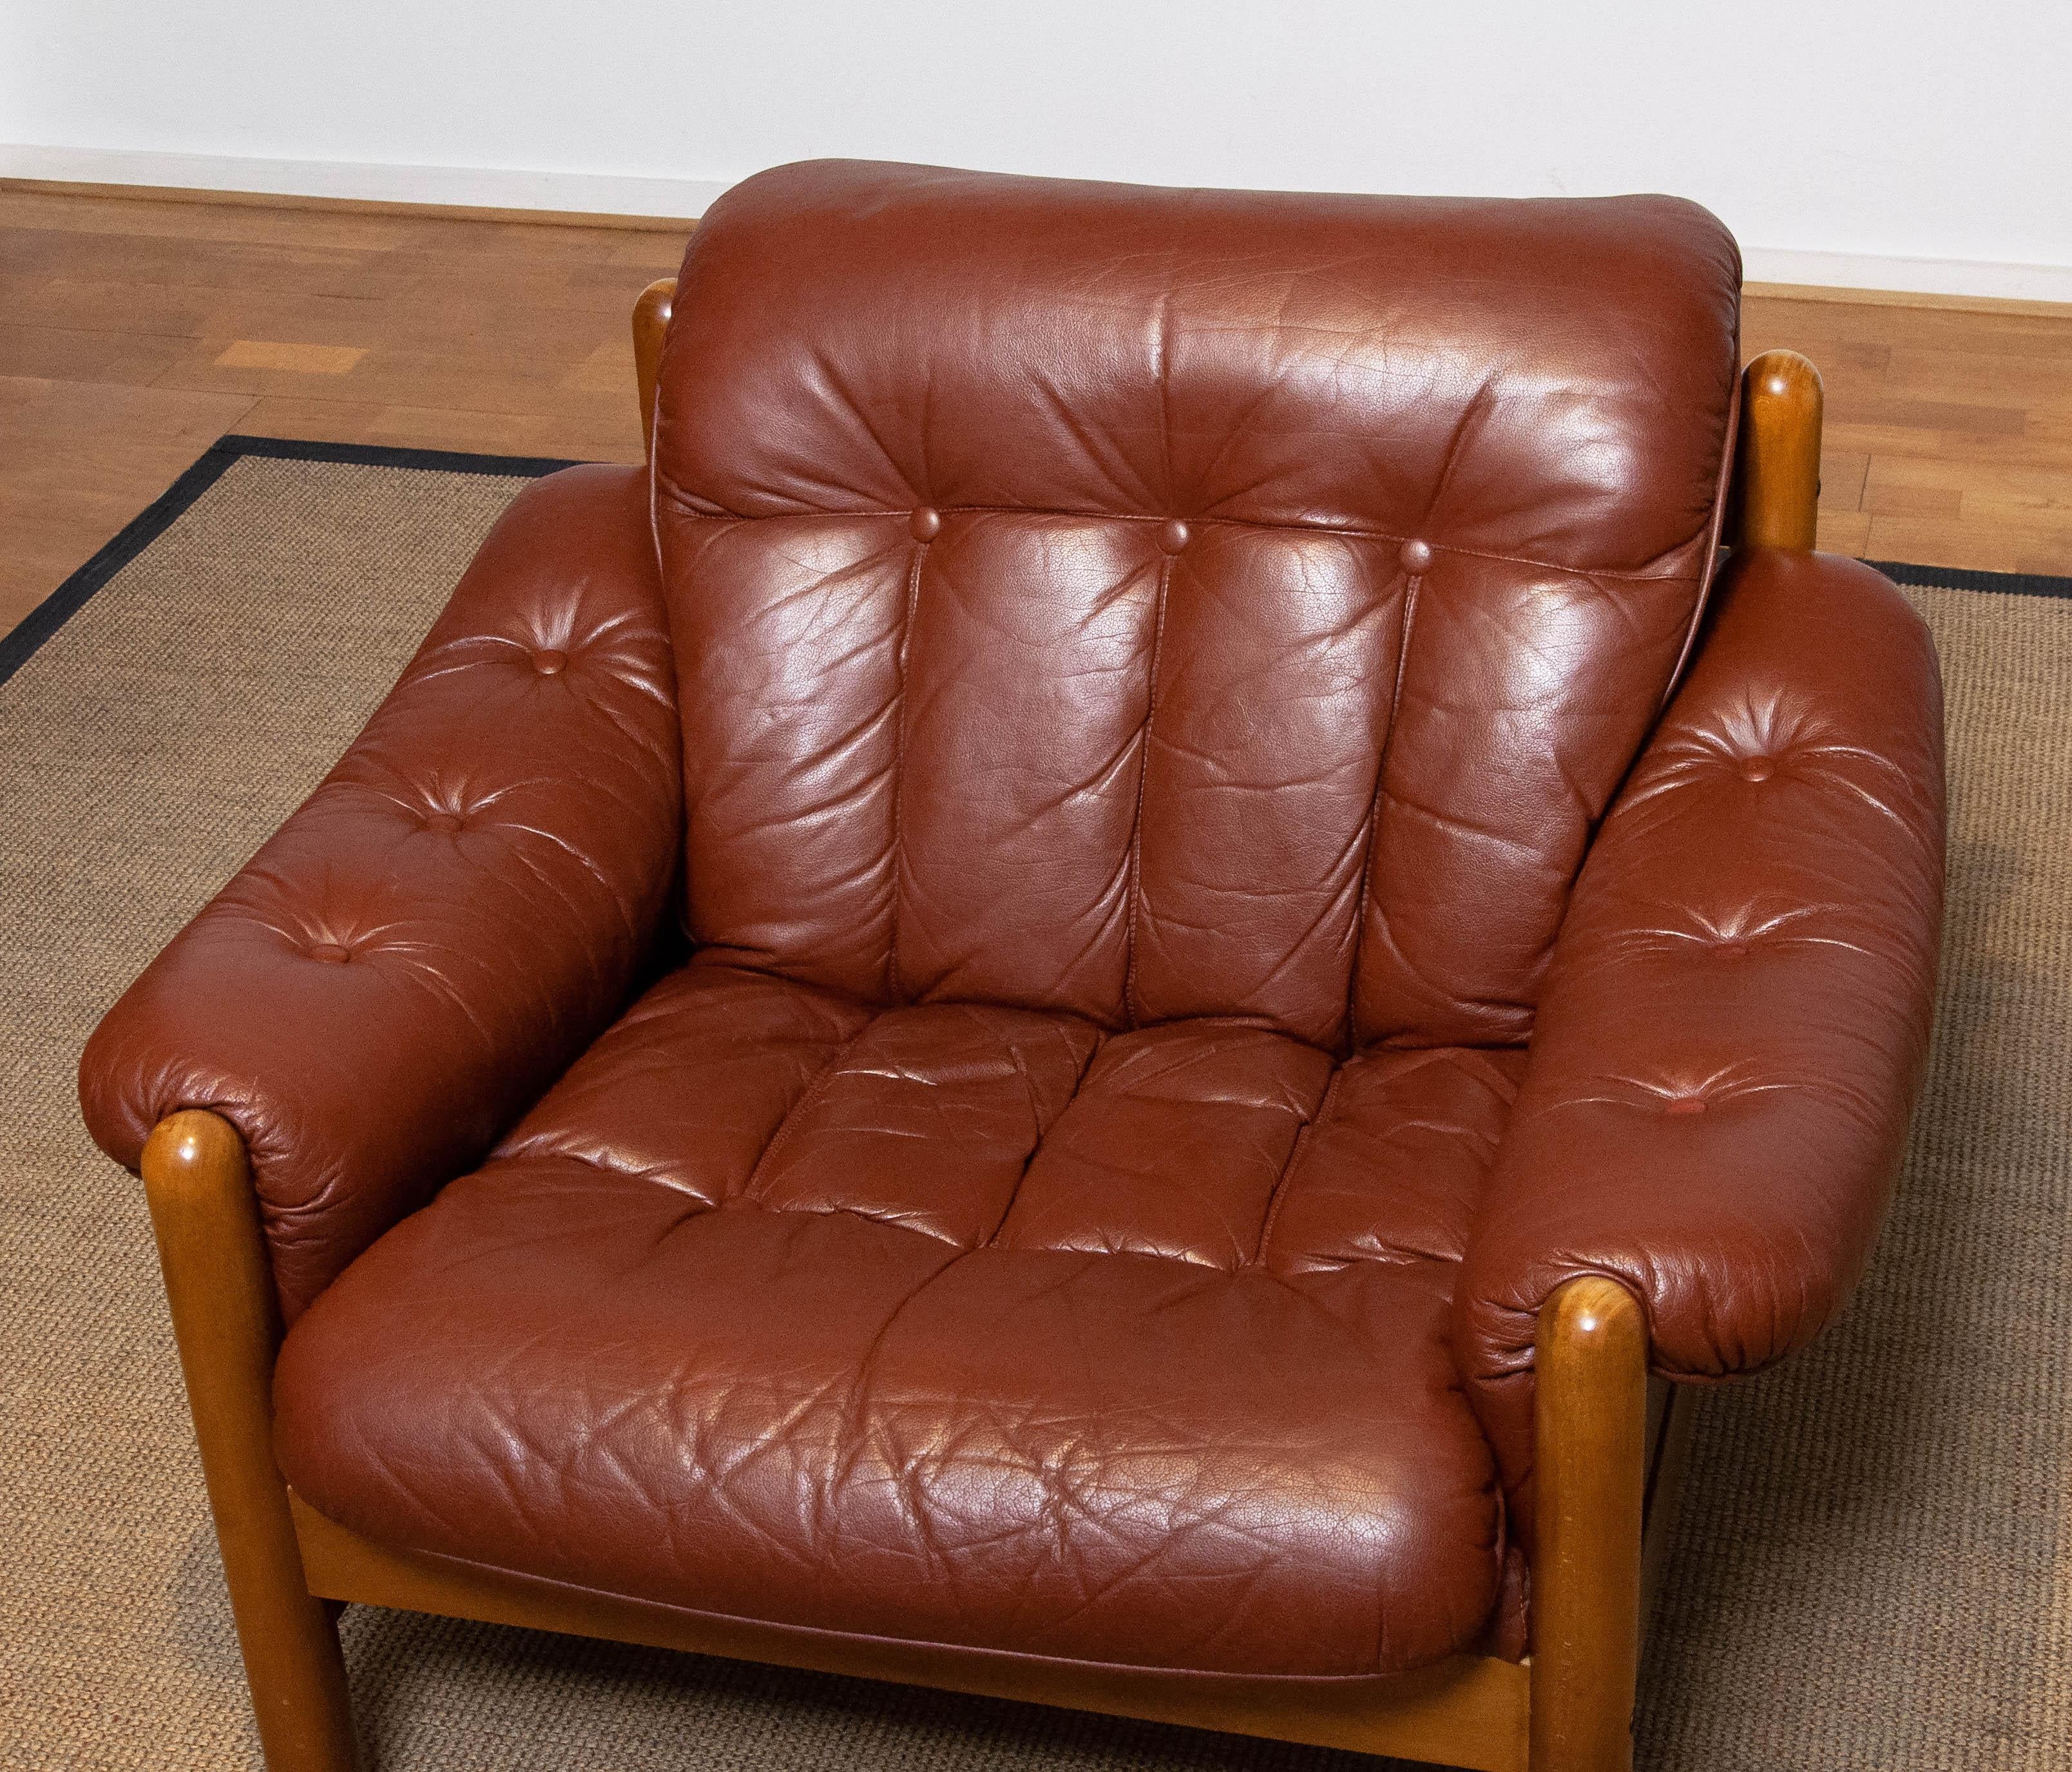 Beautiful Brutalist / Brazilian style lounge chair made by Göte Möbler Nässjö in Sweden in brown leather. The wooden construction is made of beech. Sits absolutely very comfortable even for a longer period. Allover in good condition but the chair